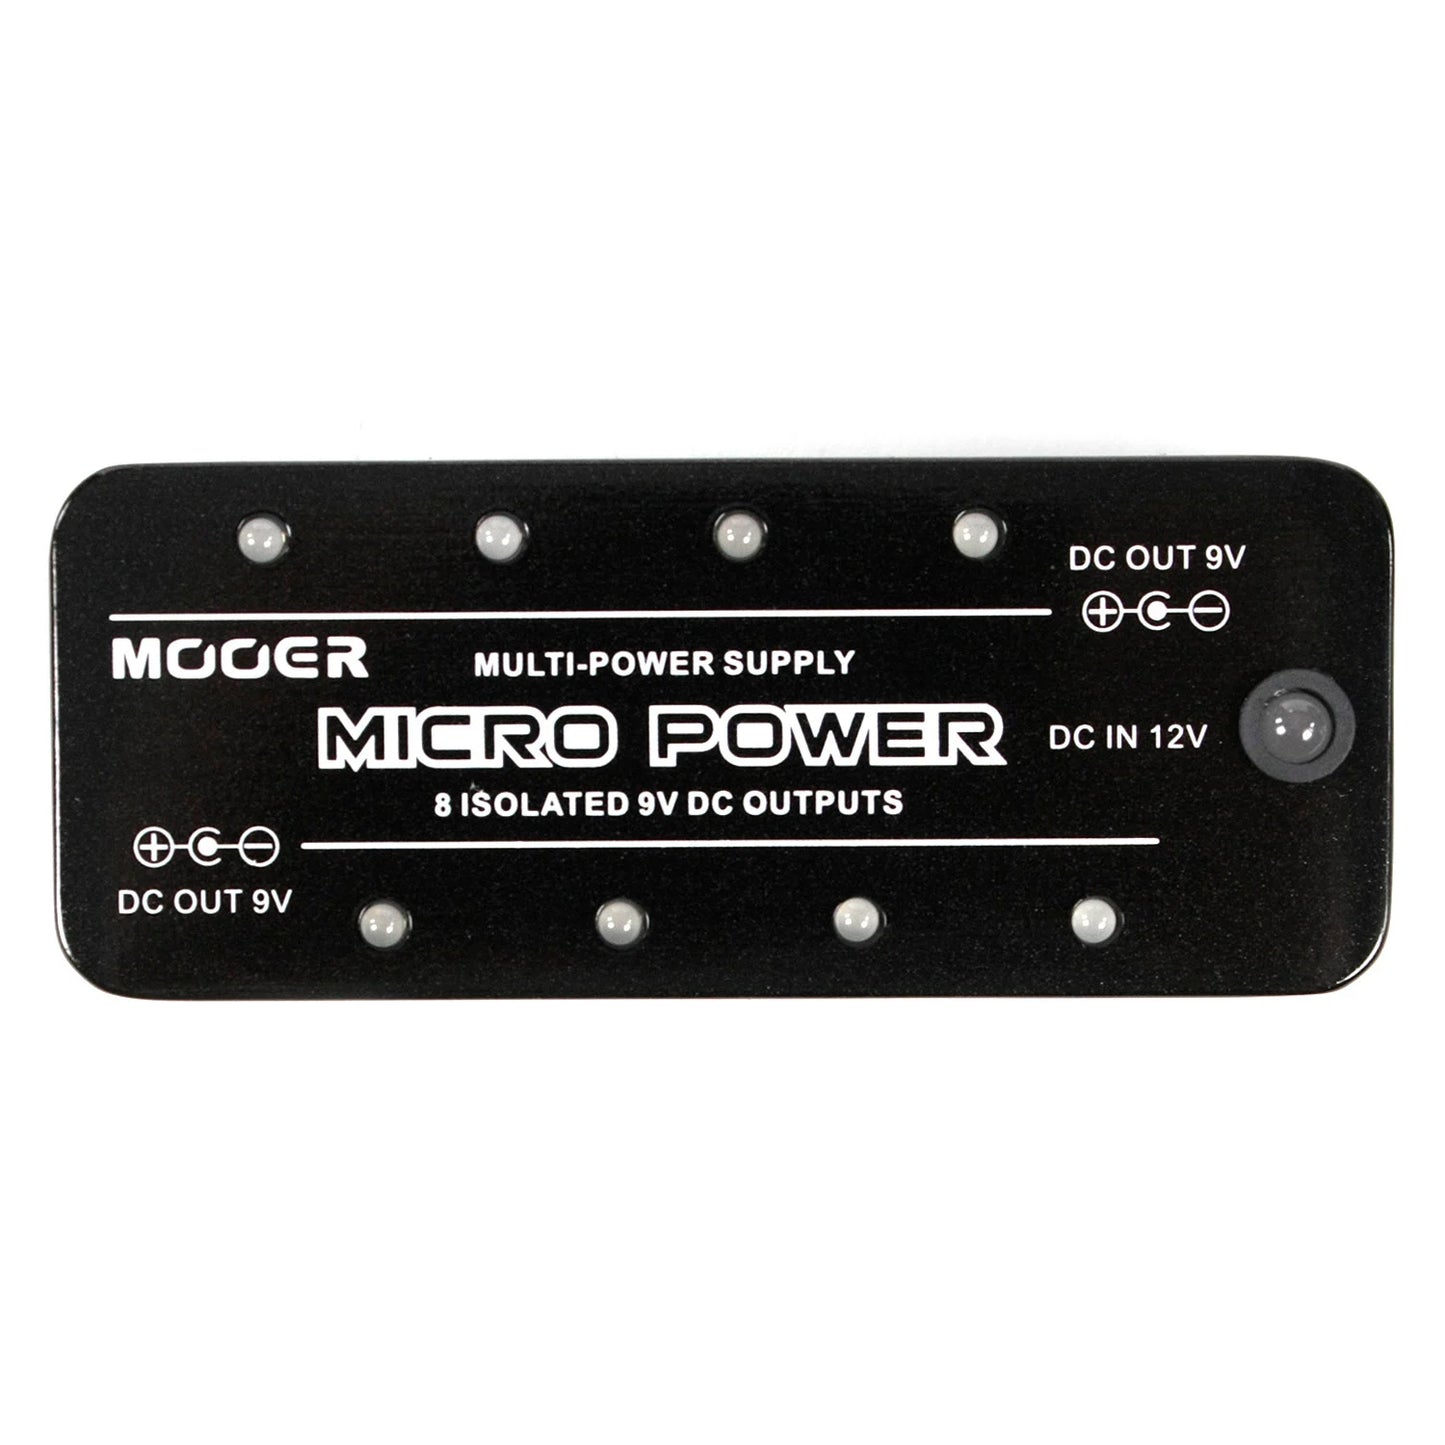 MOOER MICRO POWER - STOCK MAGASIN